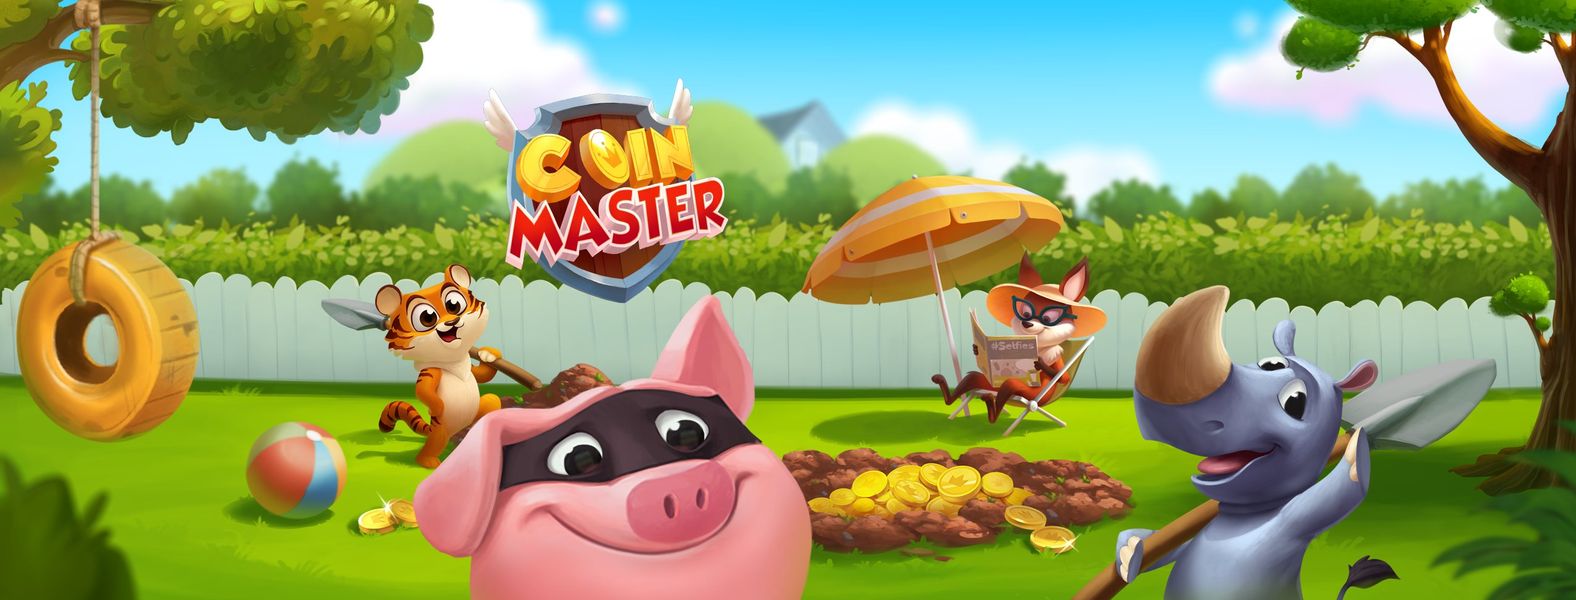 Coin Master Free Spins Today 29.05.2022, How to Get Coin Master Free Spins